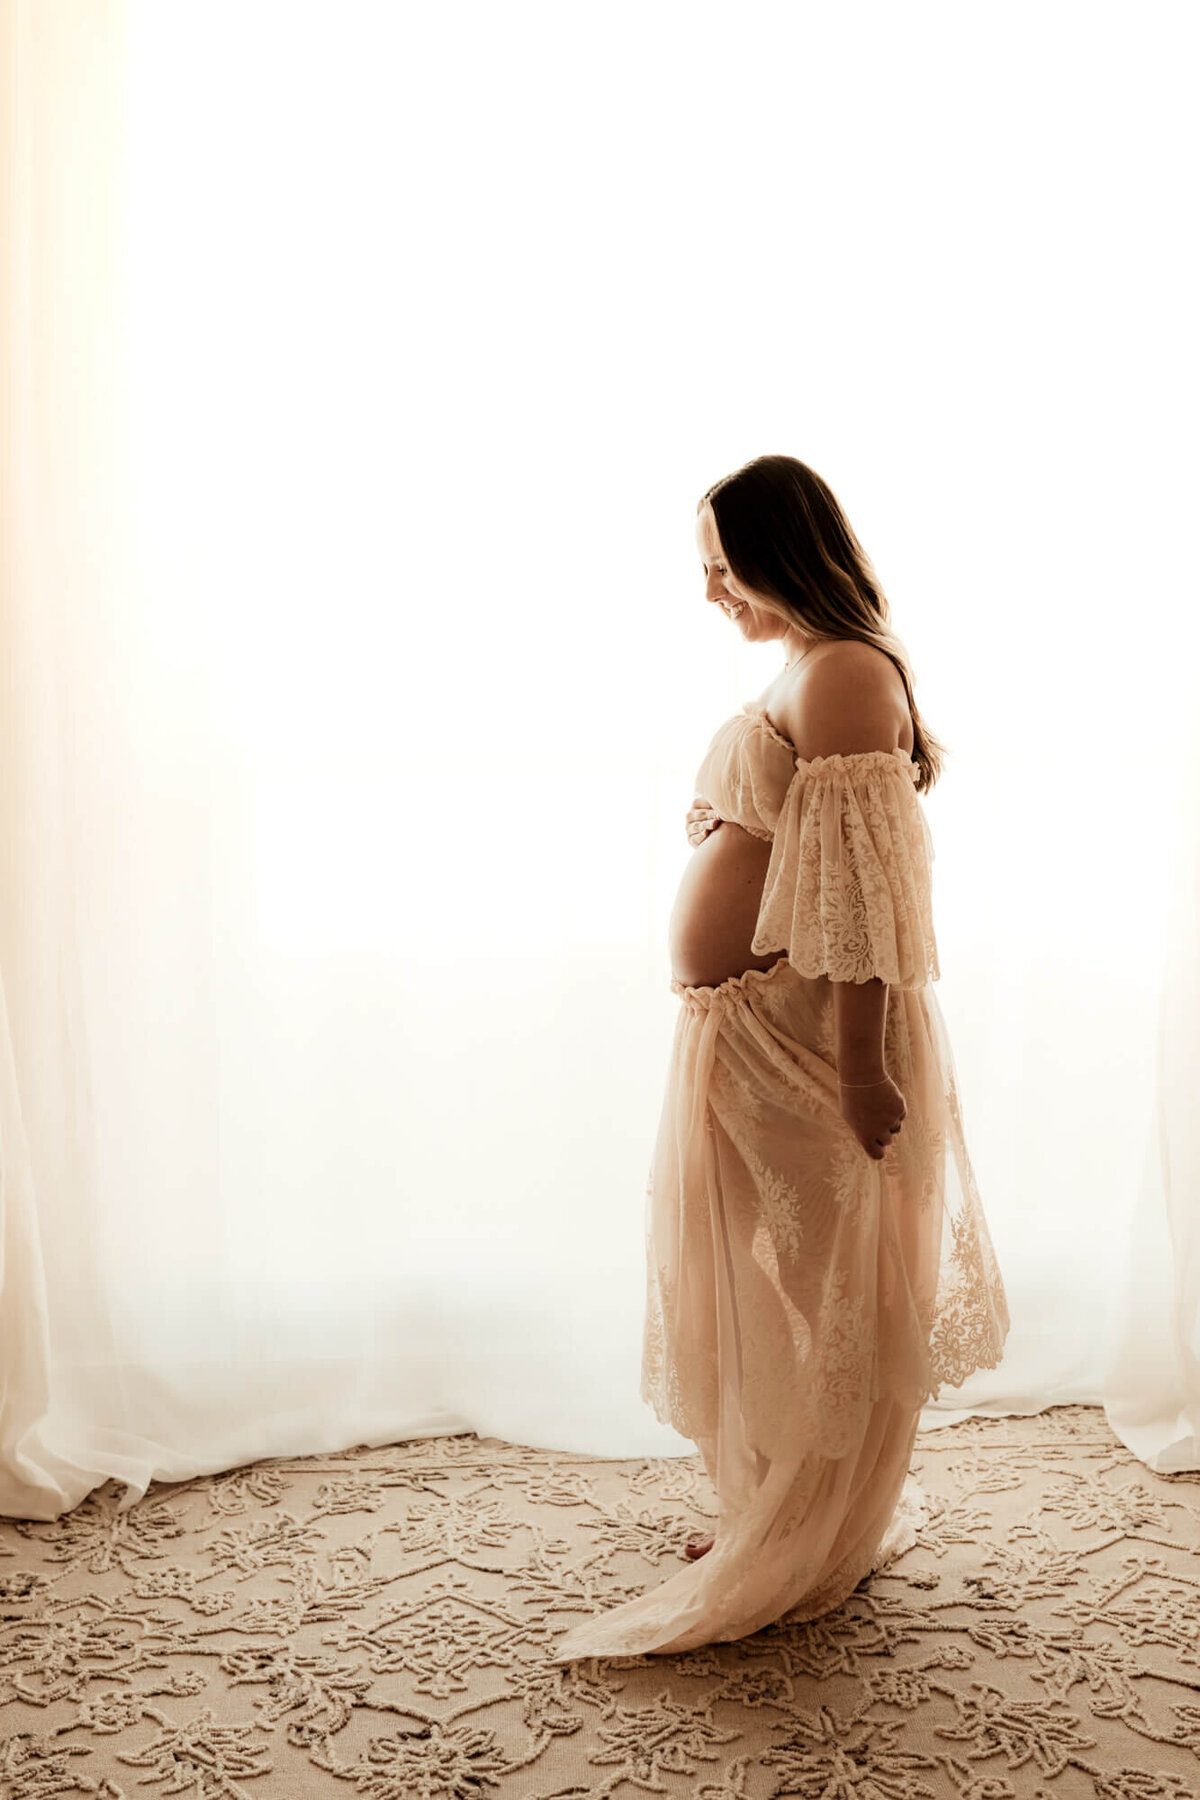 Expecting mother smiles down at her baby bump while standing near a window and wearing a blush pink lace dress.